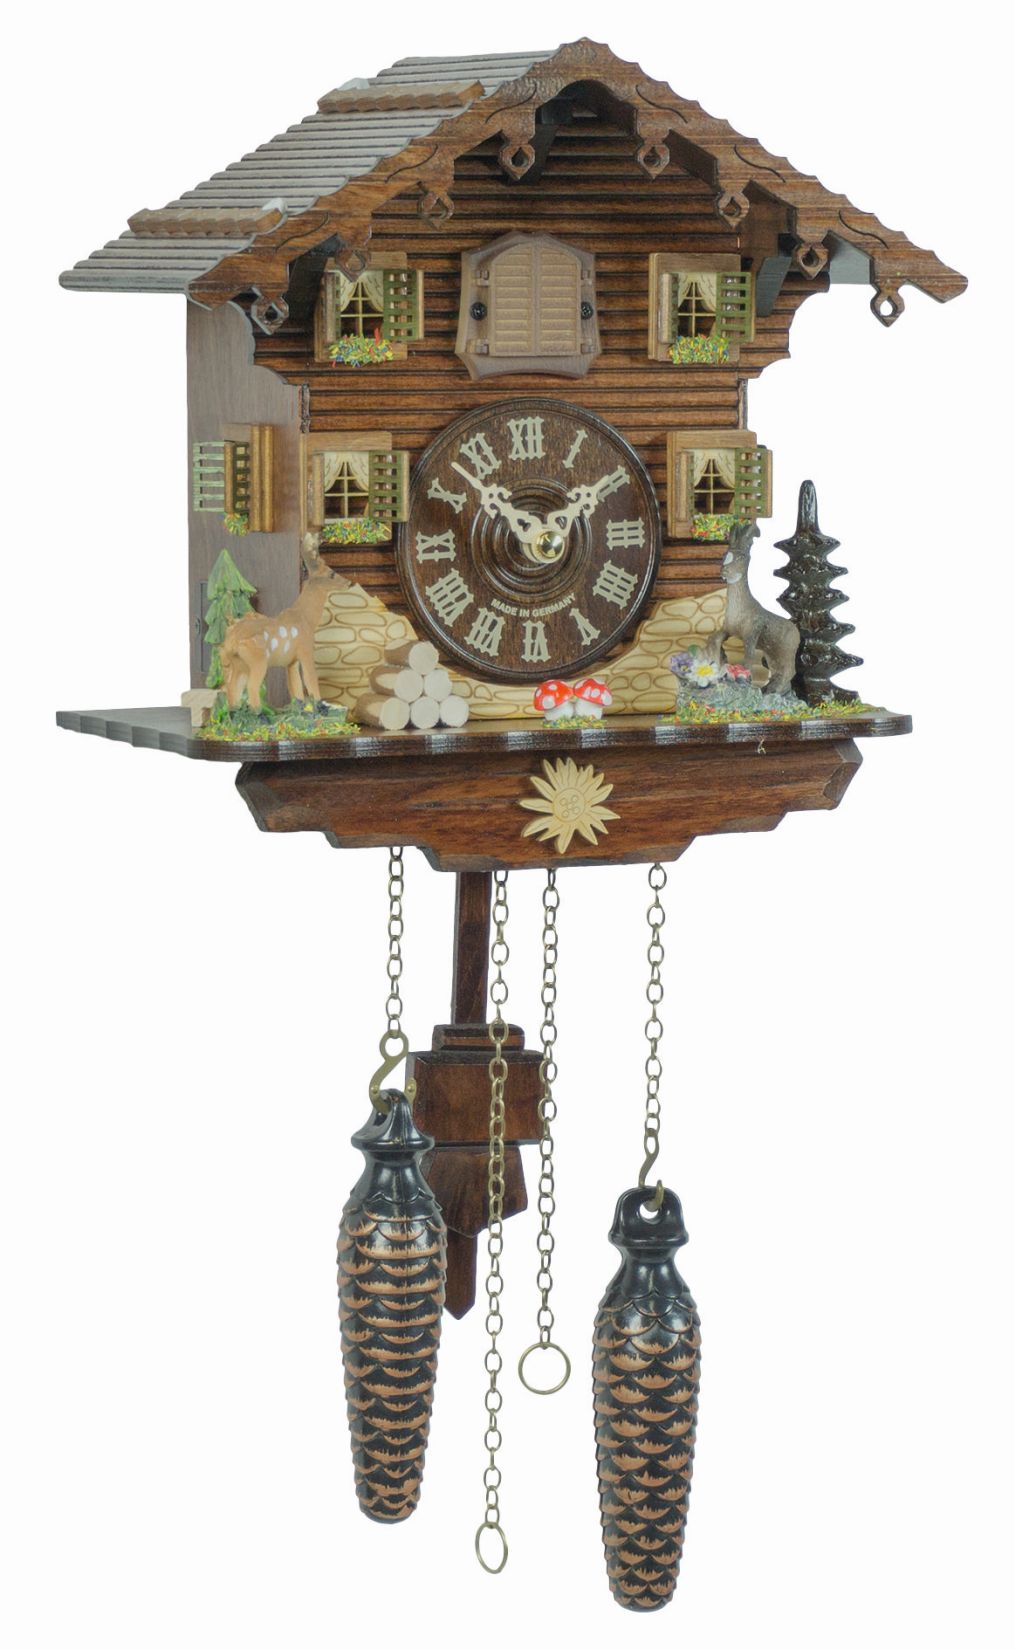 Bodmann cuckoo clock with 12 melodies